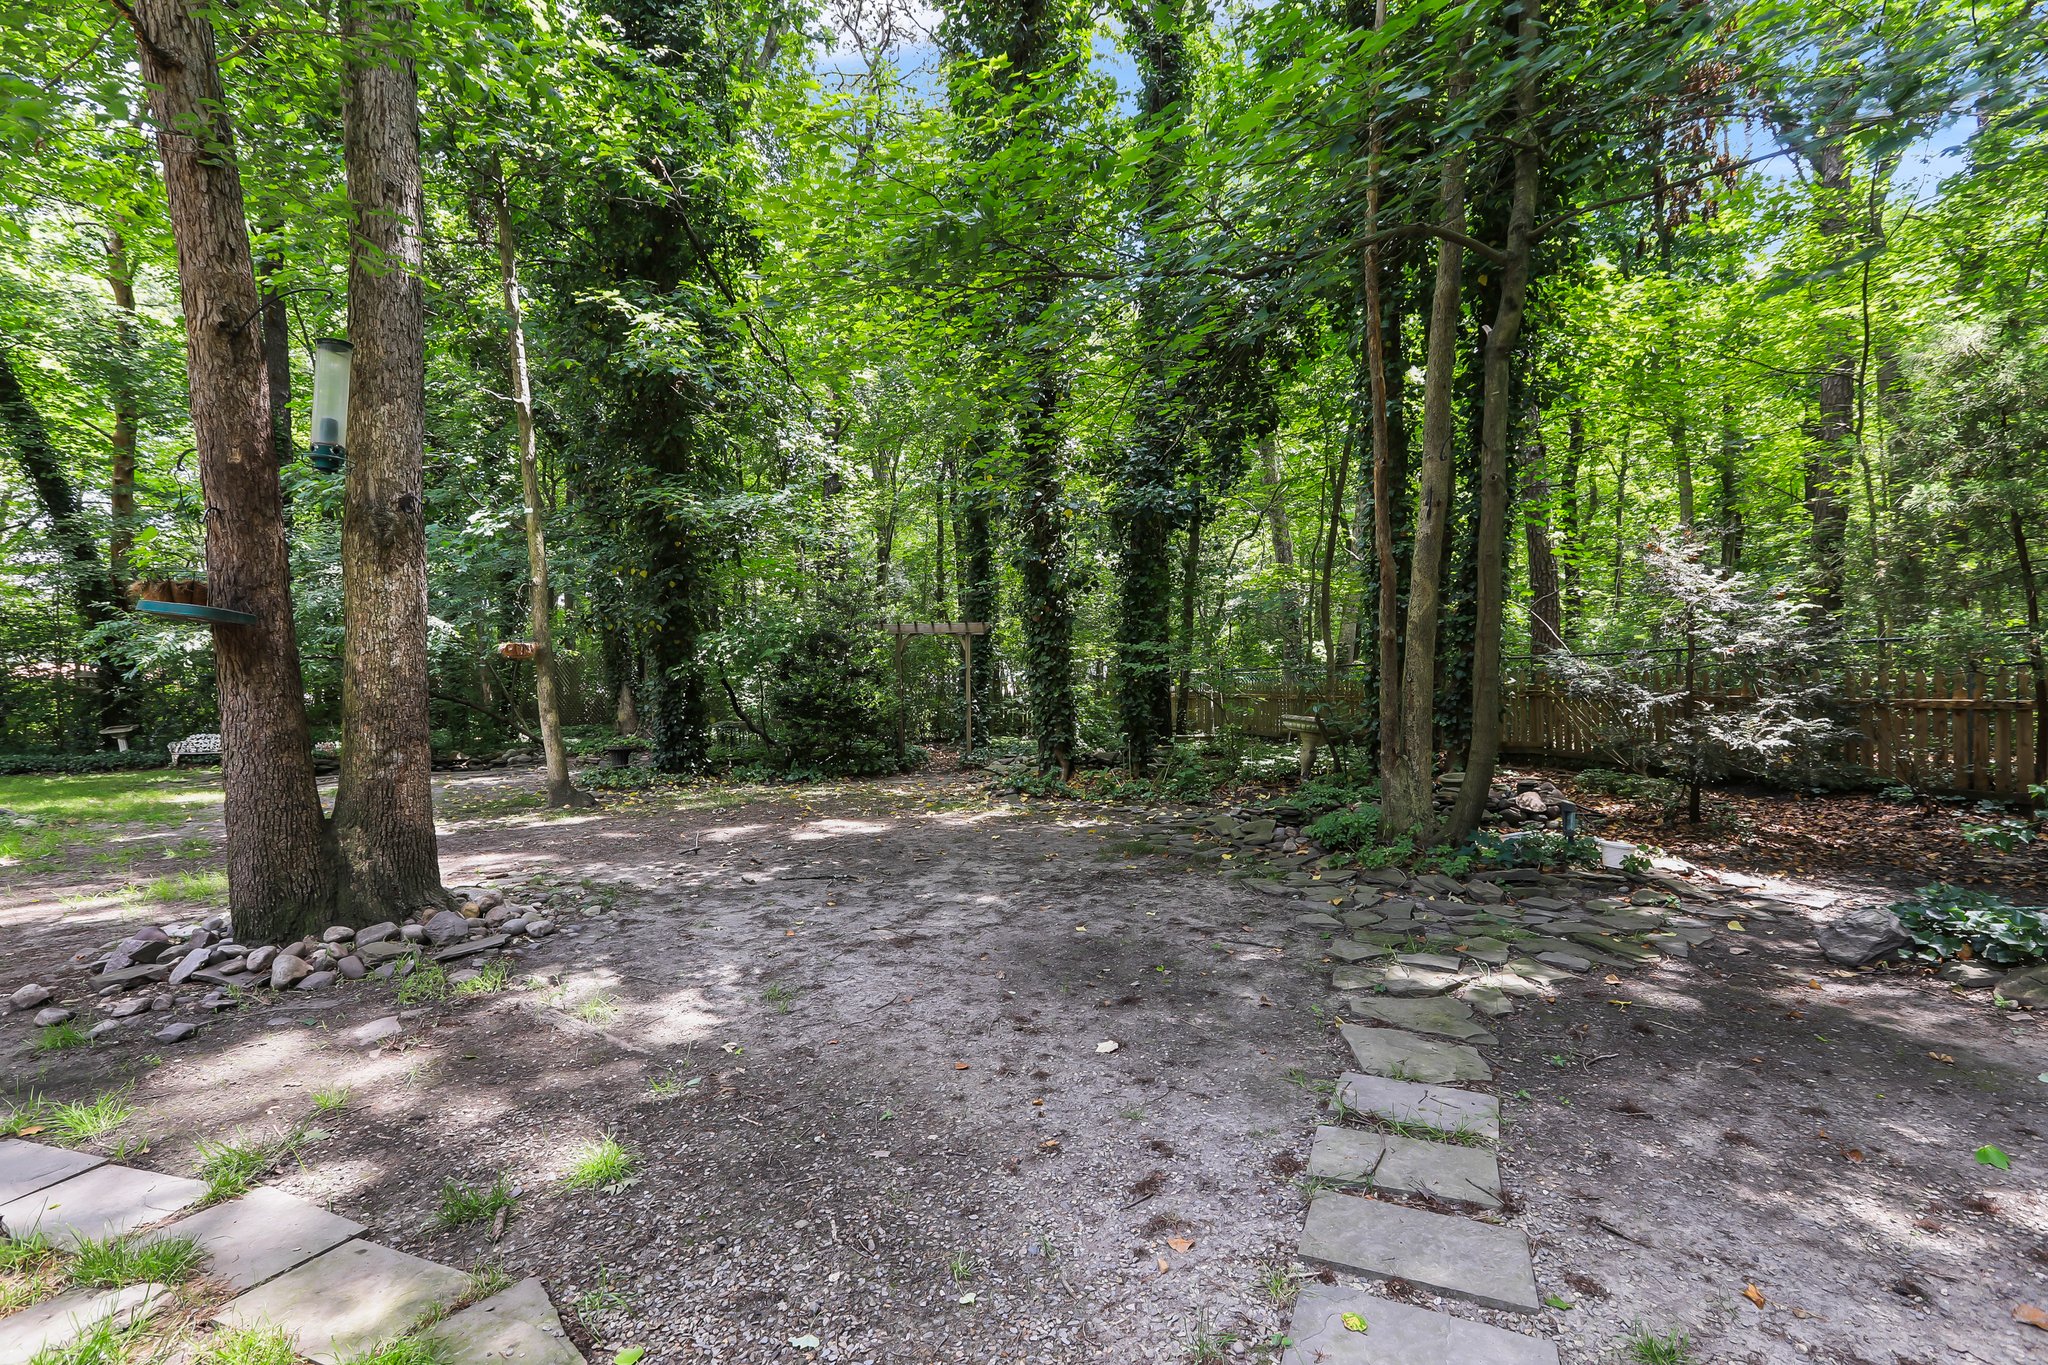 View of Path into Tree Covered Area